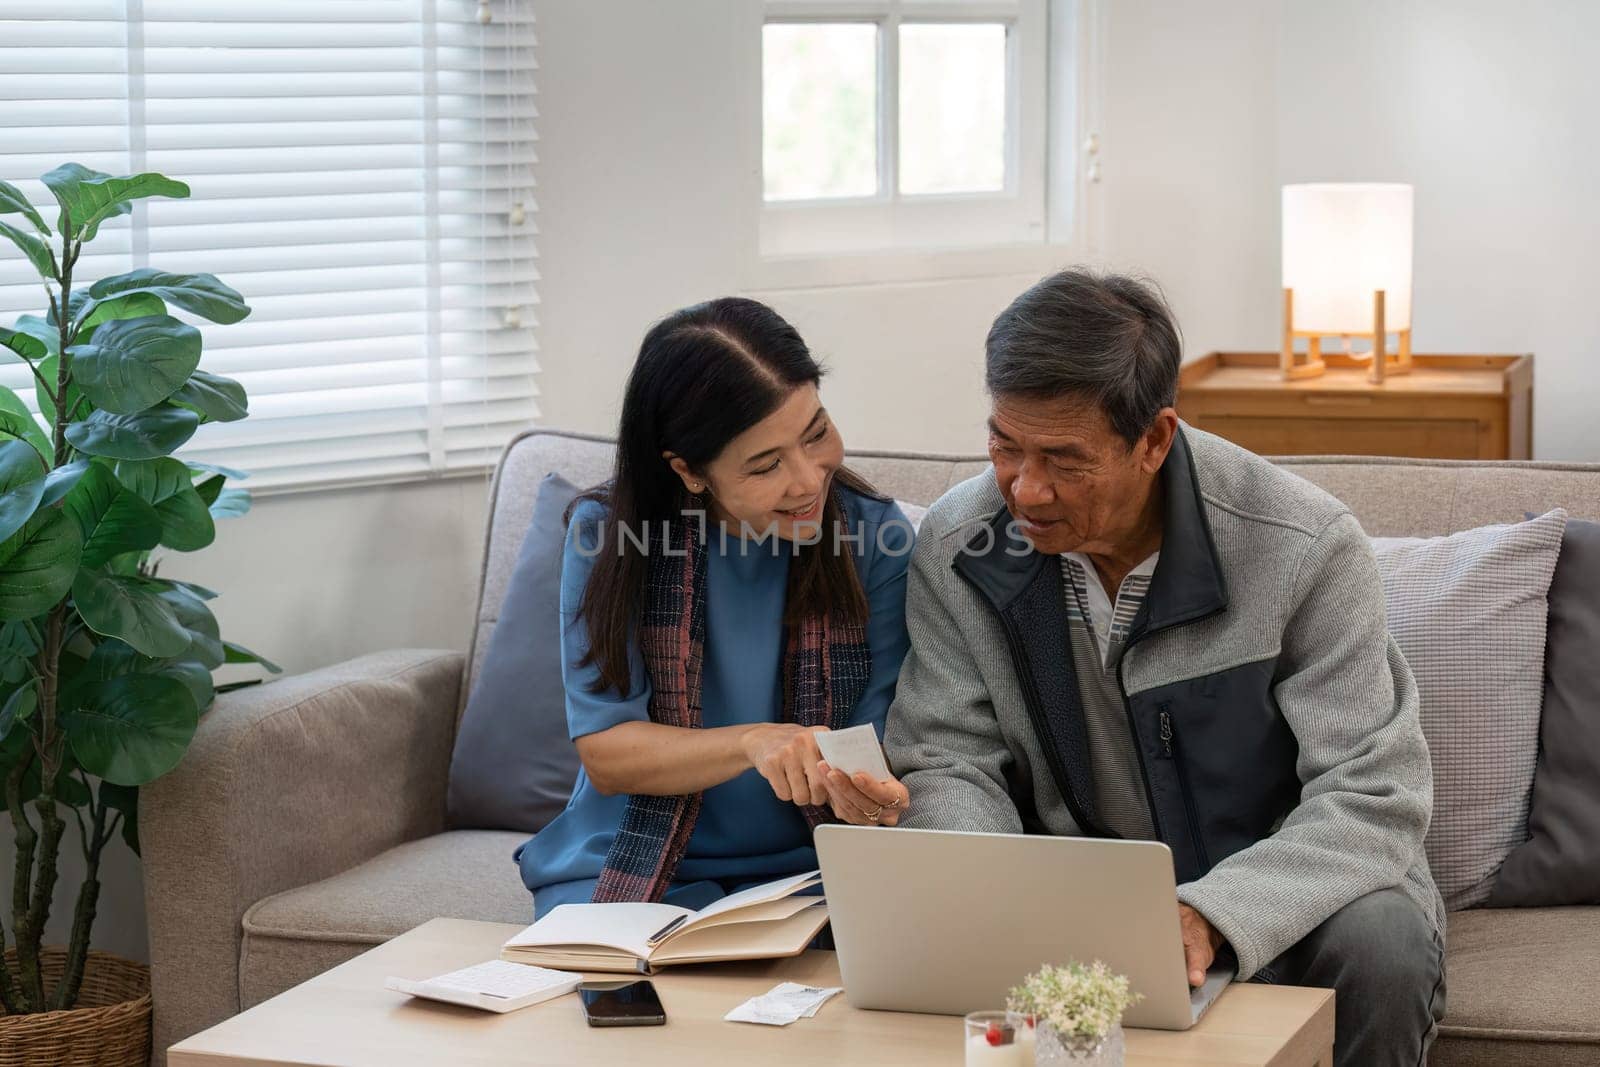 married retired senior couple checking and calculate financial billing together on sofa.